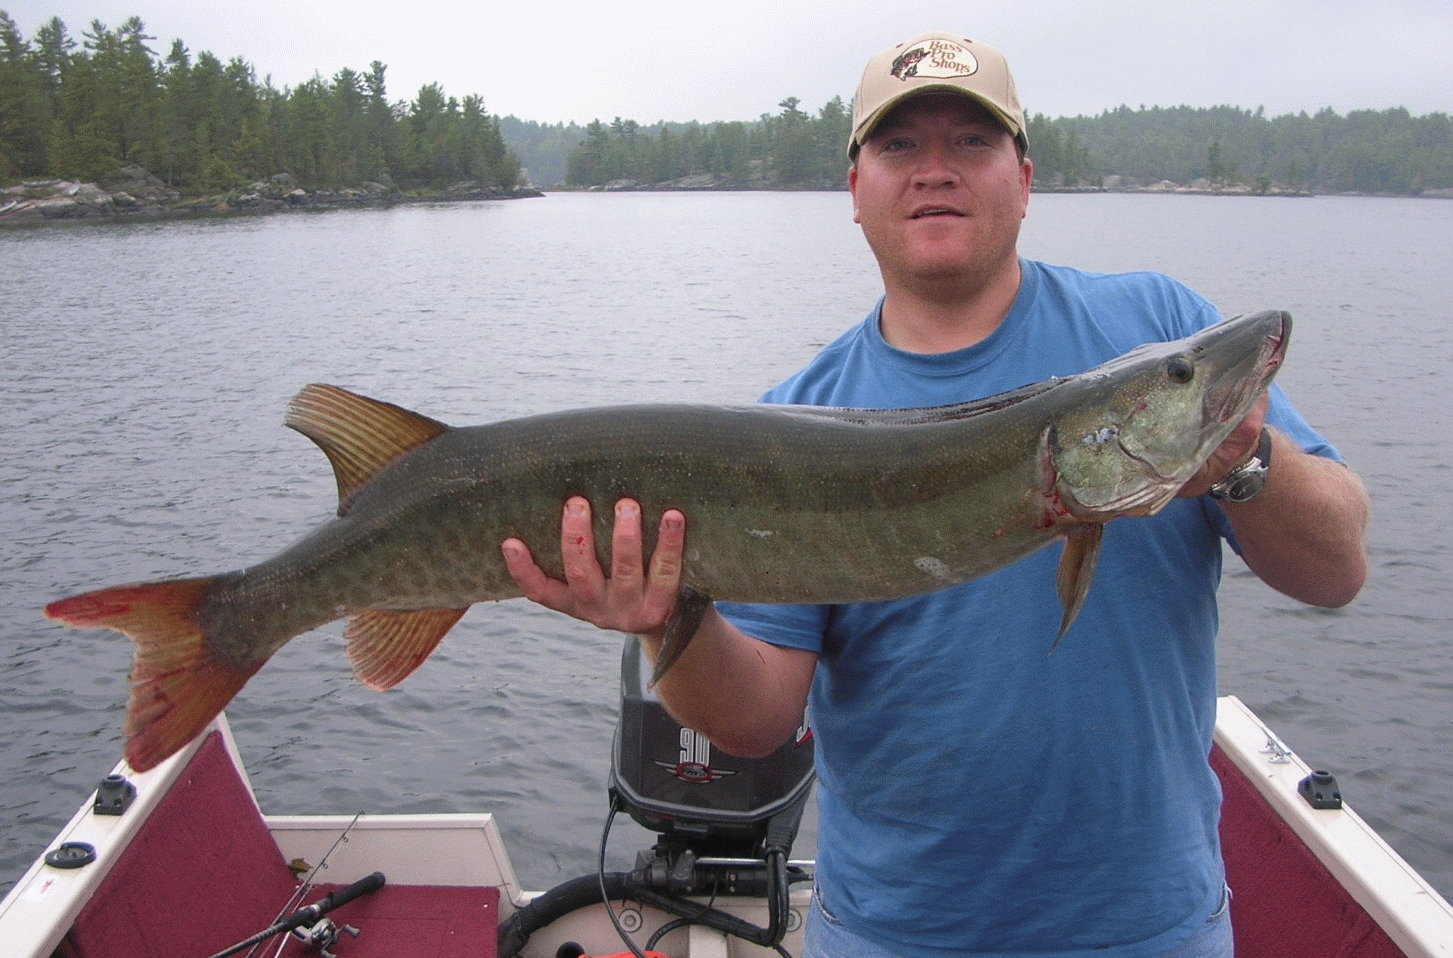 Frank holding a large muskie.